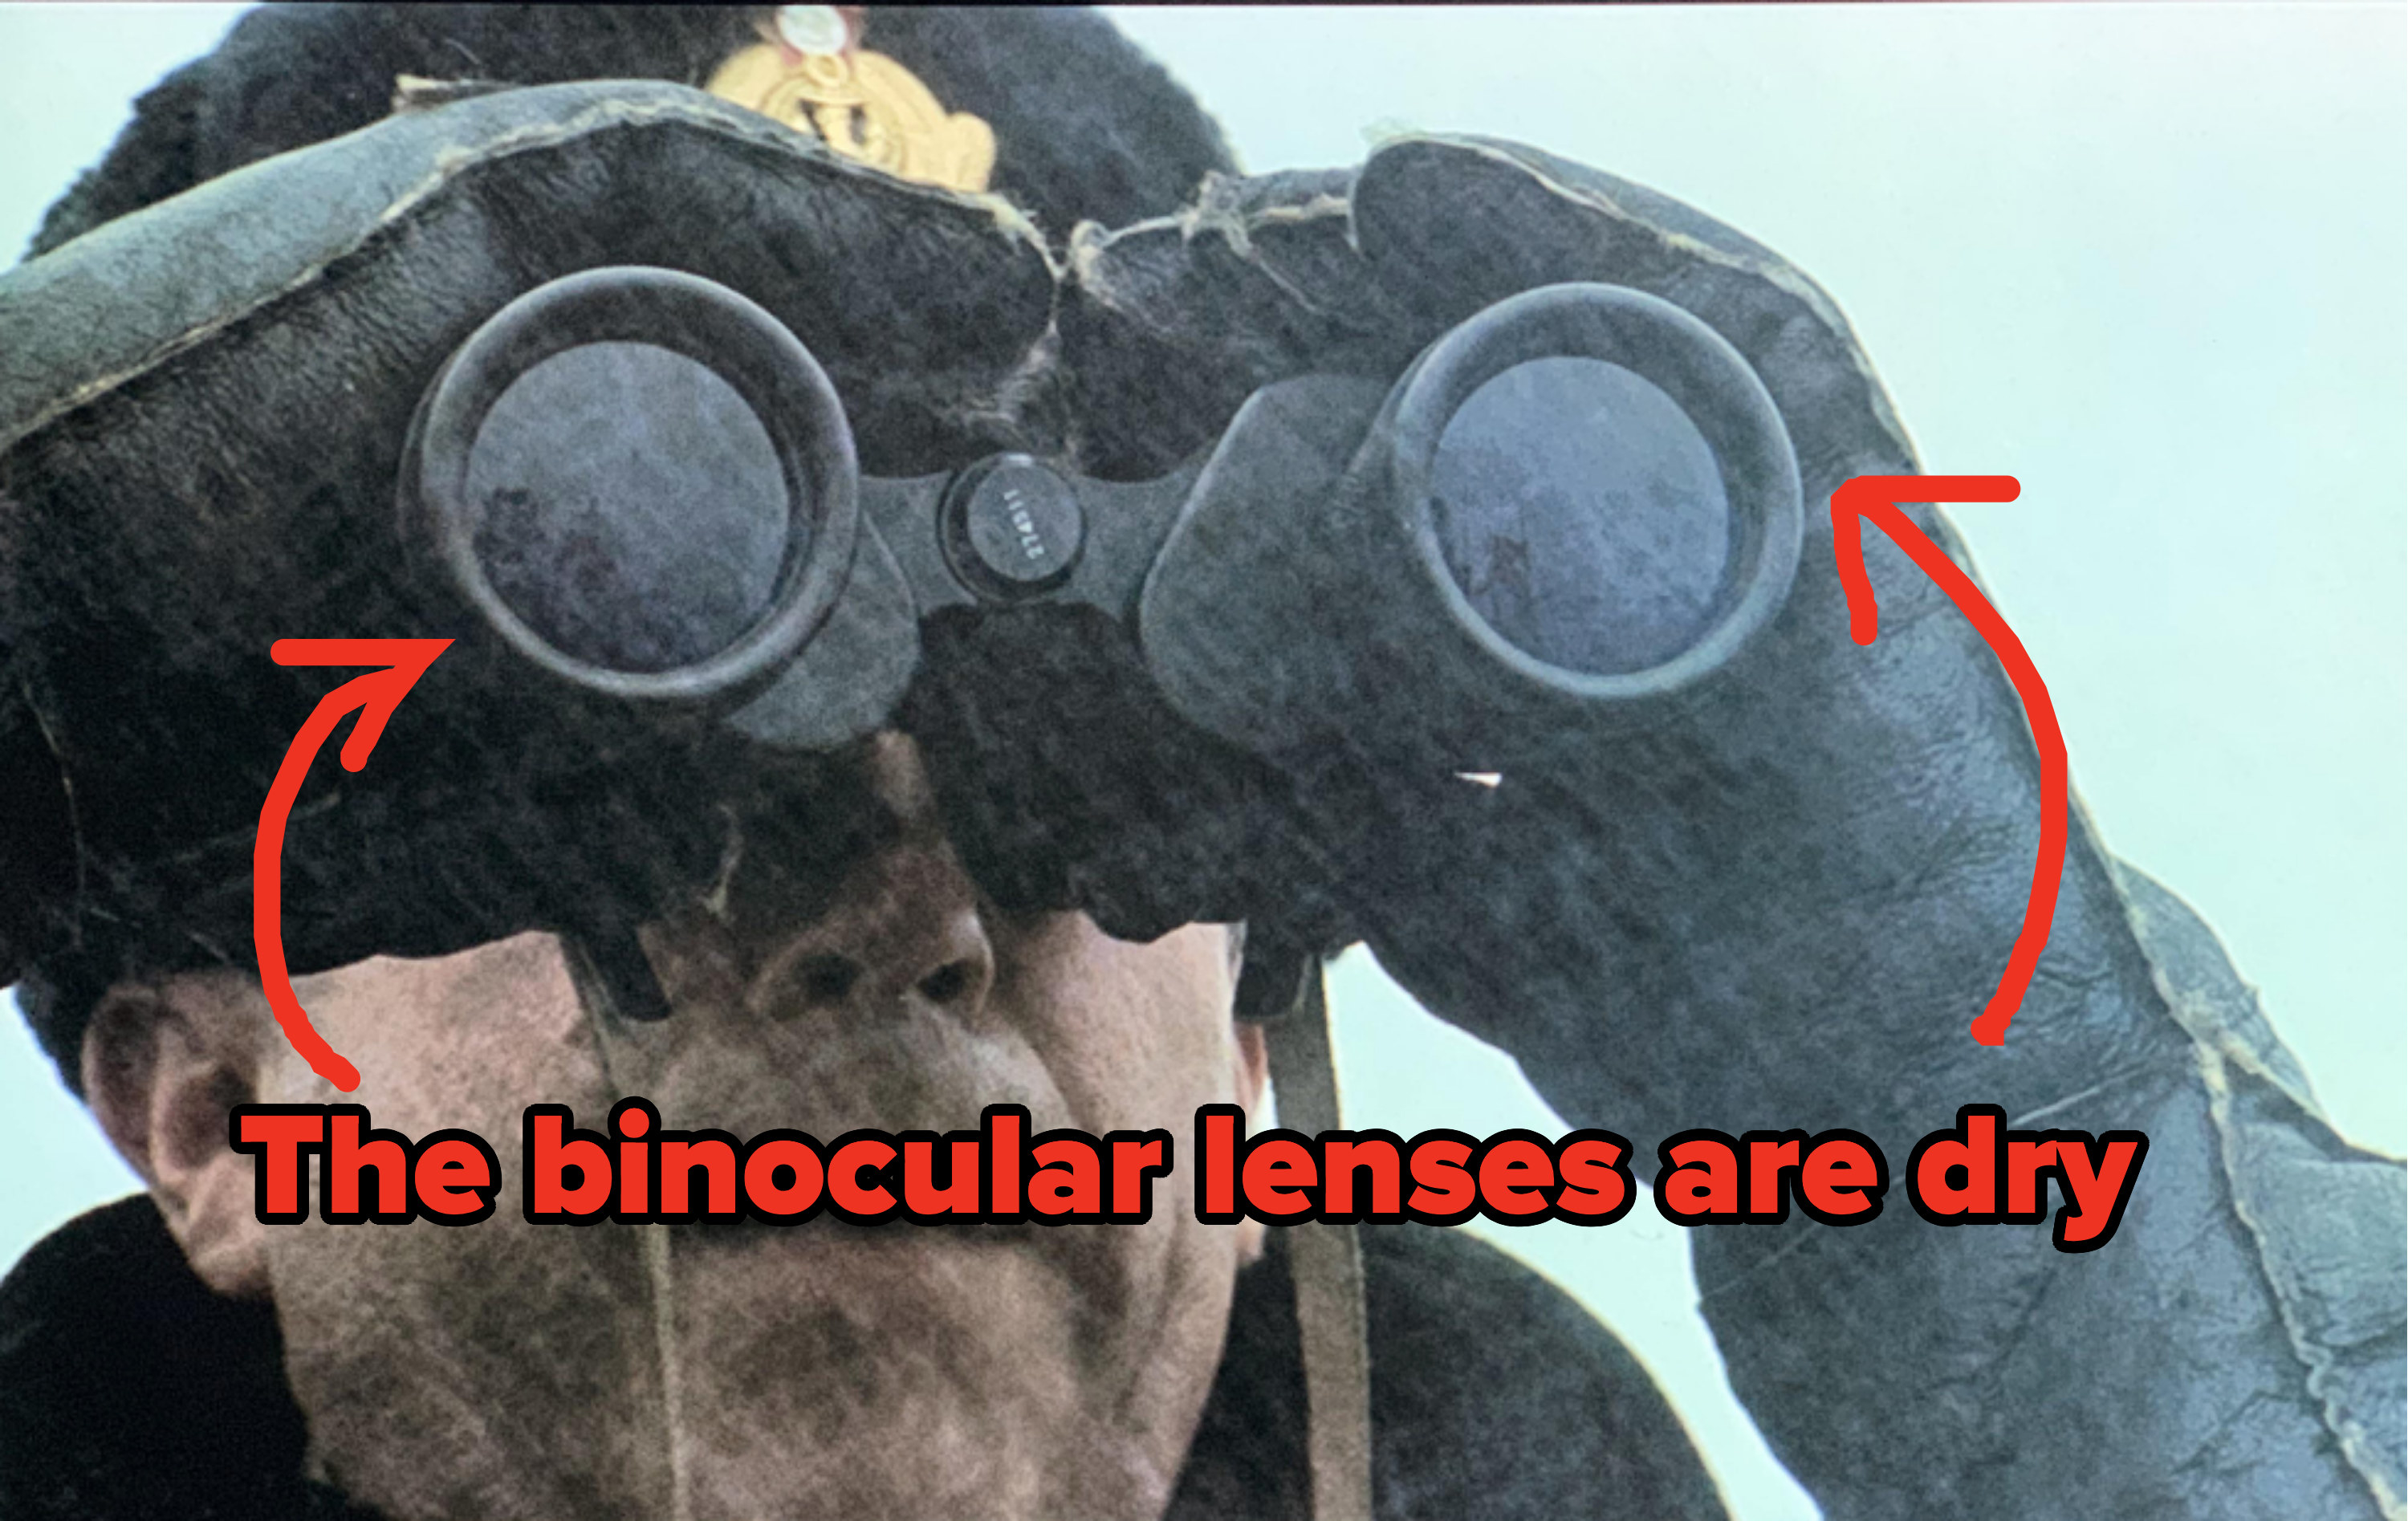 A character is using binoculars in a rainstorm, but the binocular lenses are dry